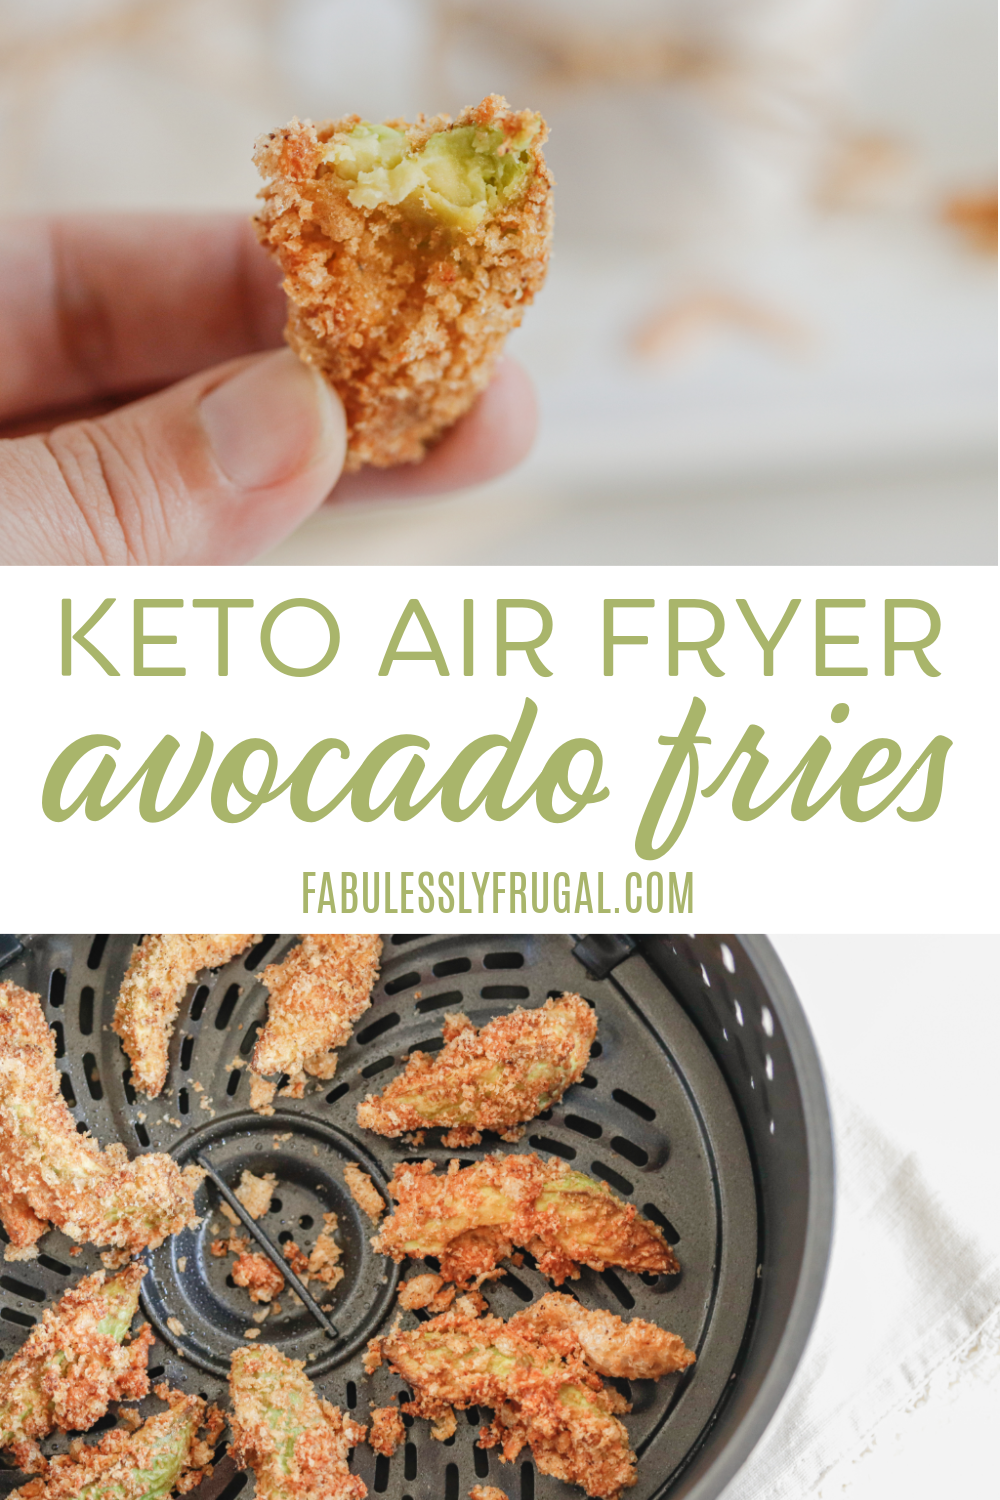 Healthy Keto Avocado fries are just what you need for your next get together with friends, perfect healthy keto appetizer!